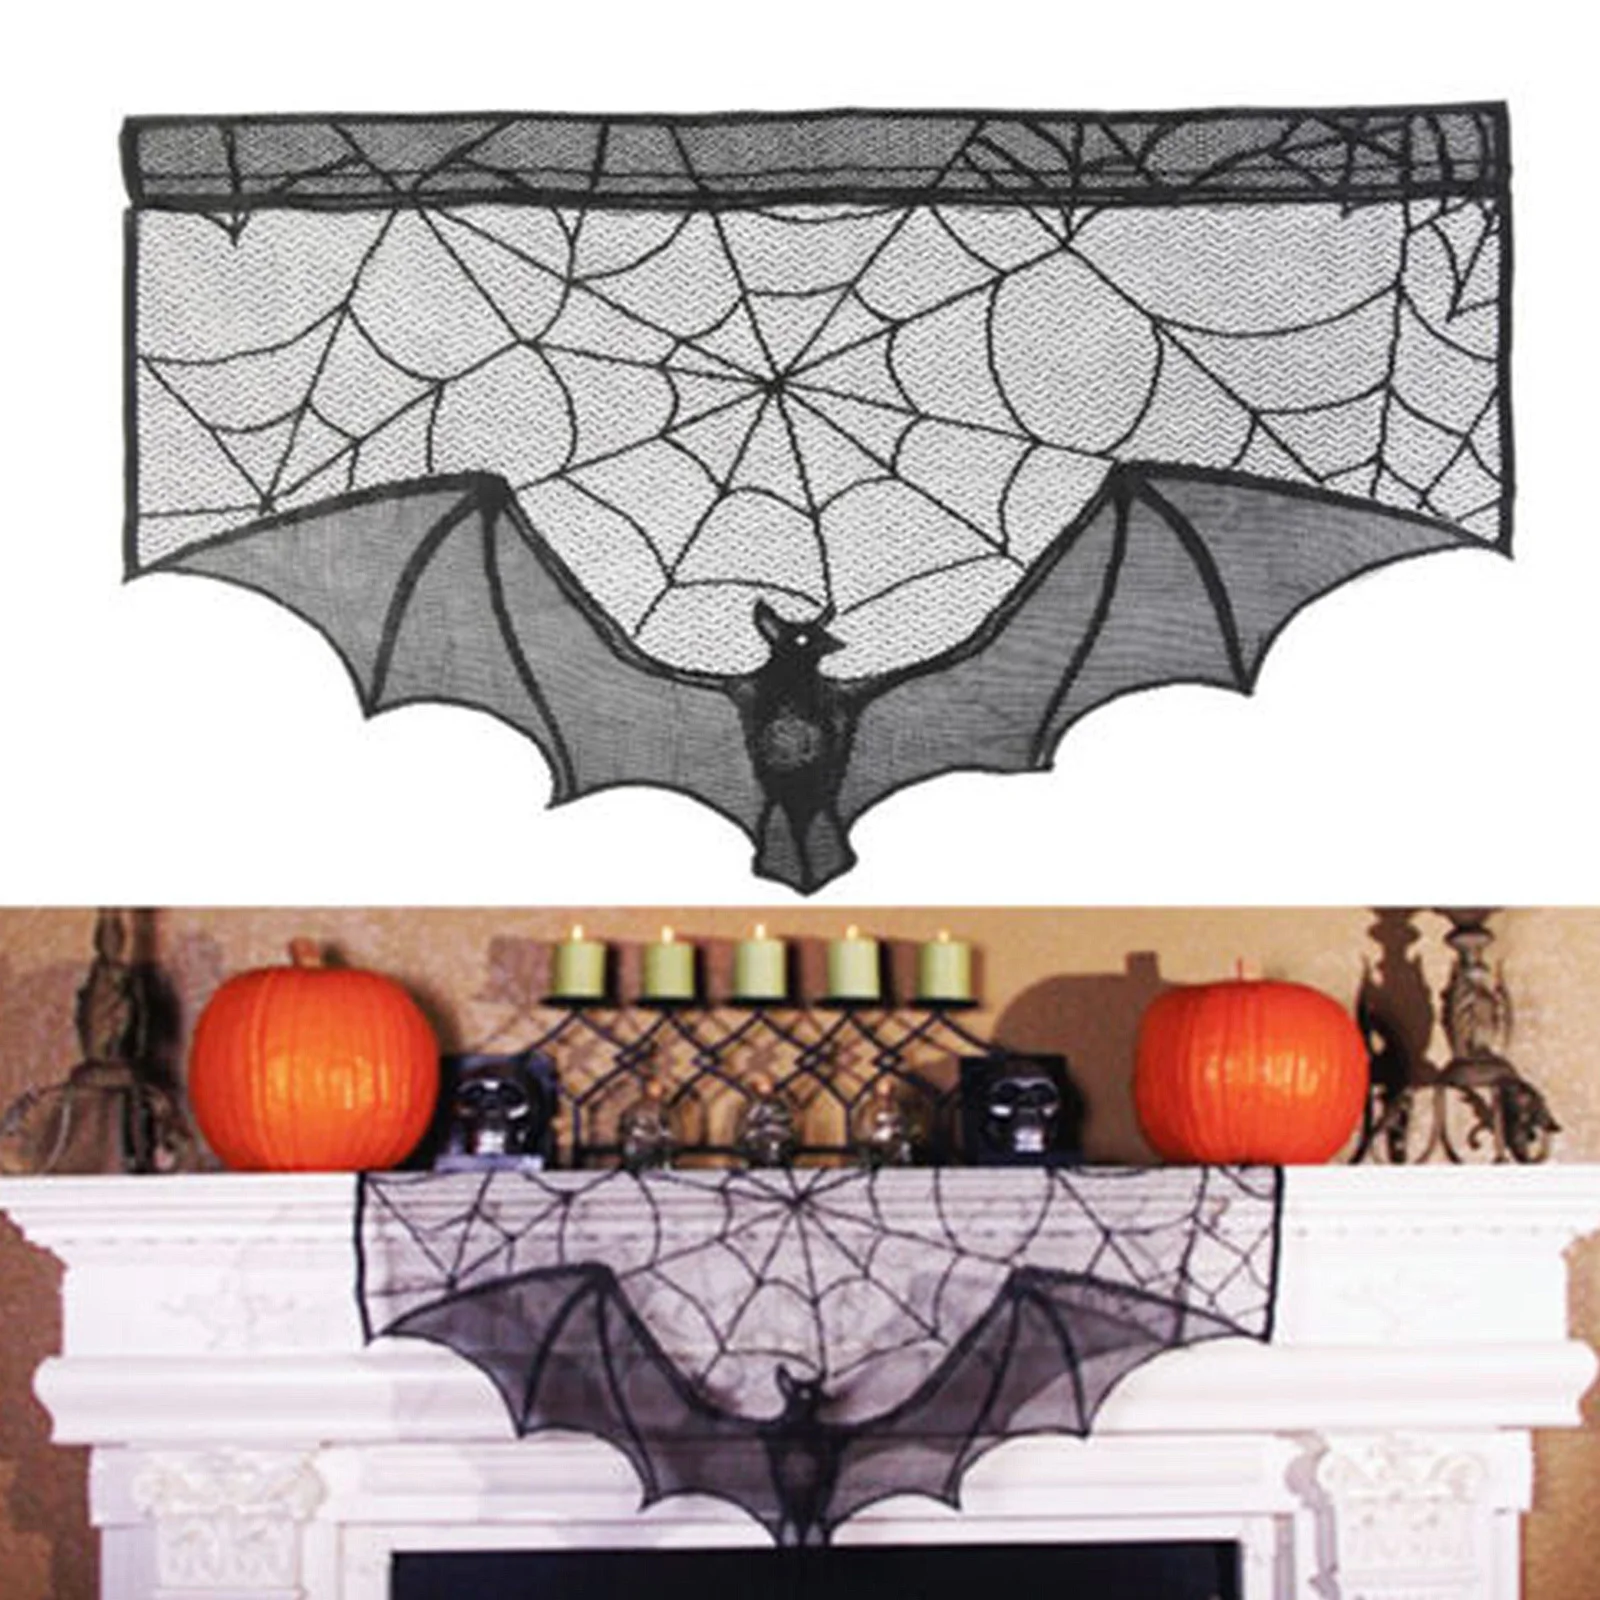 

Bats Curtains Halloween Decorative Black Lace Spider Web Holiday Stove Towel Lampshade Fireplace Cloth Decor for Spooky Festival